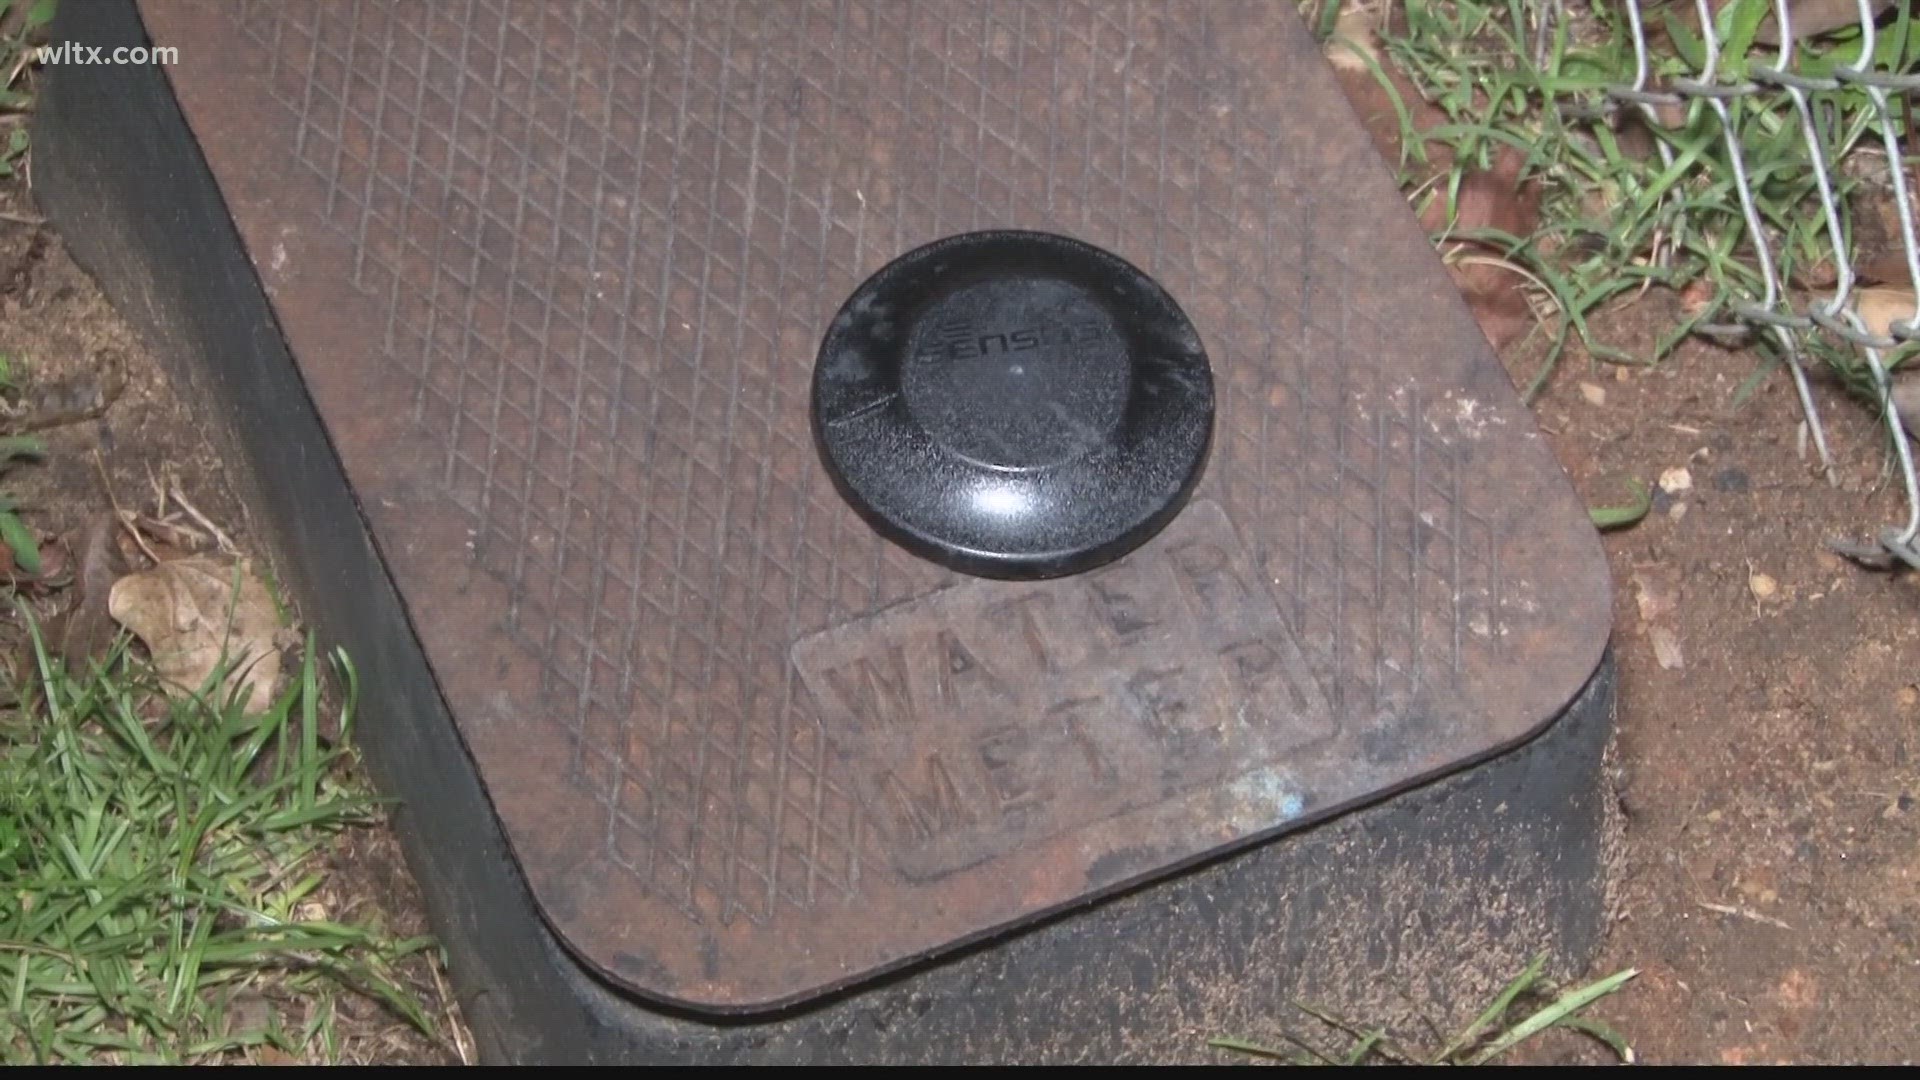 Crews have started installing new water meters for residents in West Columbia and it could help lower water bills.